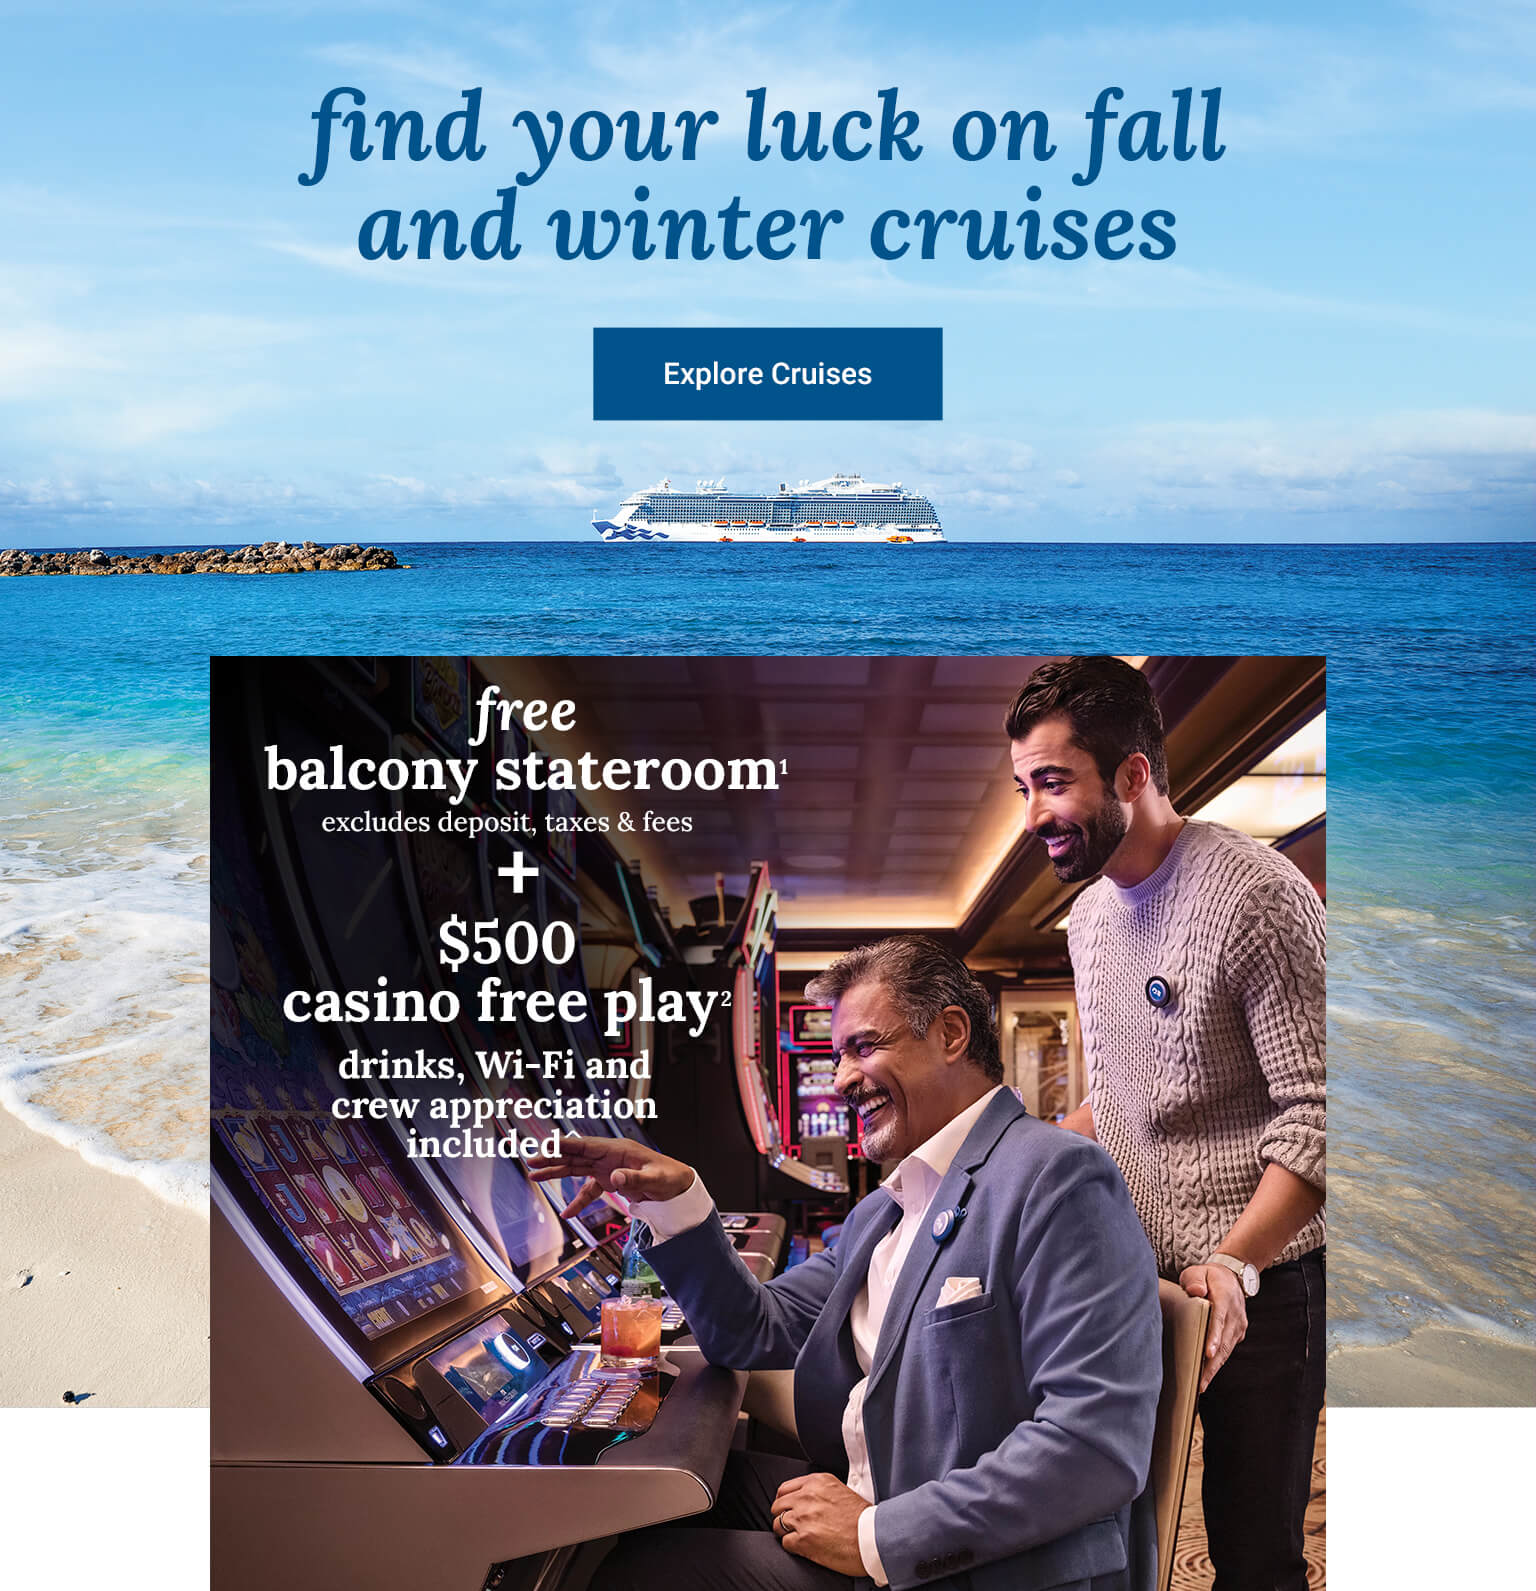 free balcony stateroom + $500 casino free play + drinks, Wi-Fi & crew appreciation included. Click here to book. 